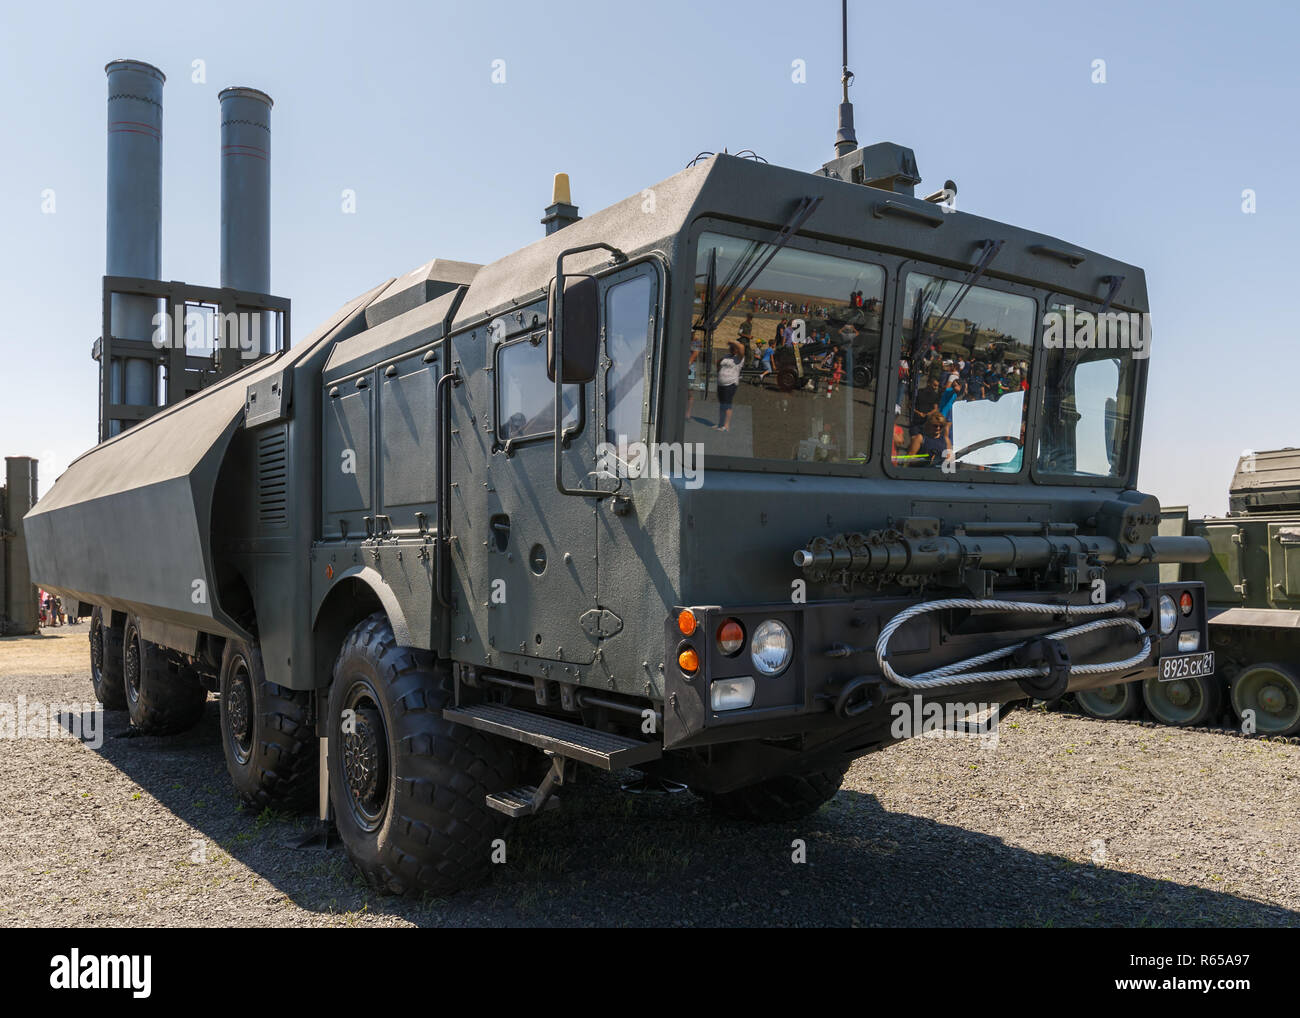 International military technical forum 'ARMY-2018». Bastion coastal missile launcher with Yakhont and P-800 Oniks anti-ship missiles Stock Photo